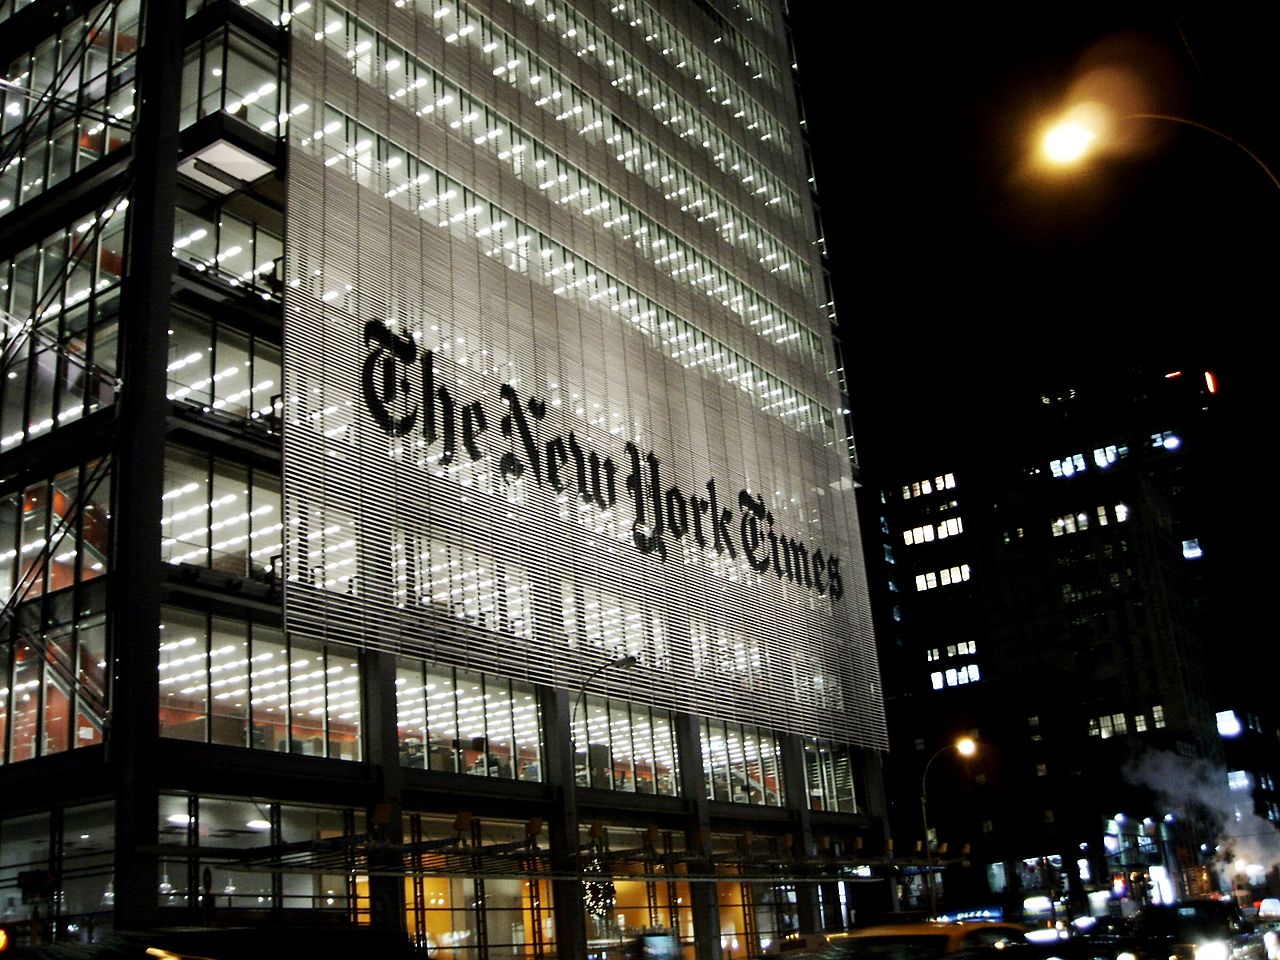 Should the New York Times Hire a Radical?